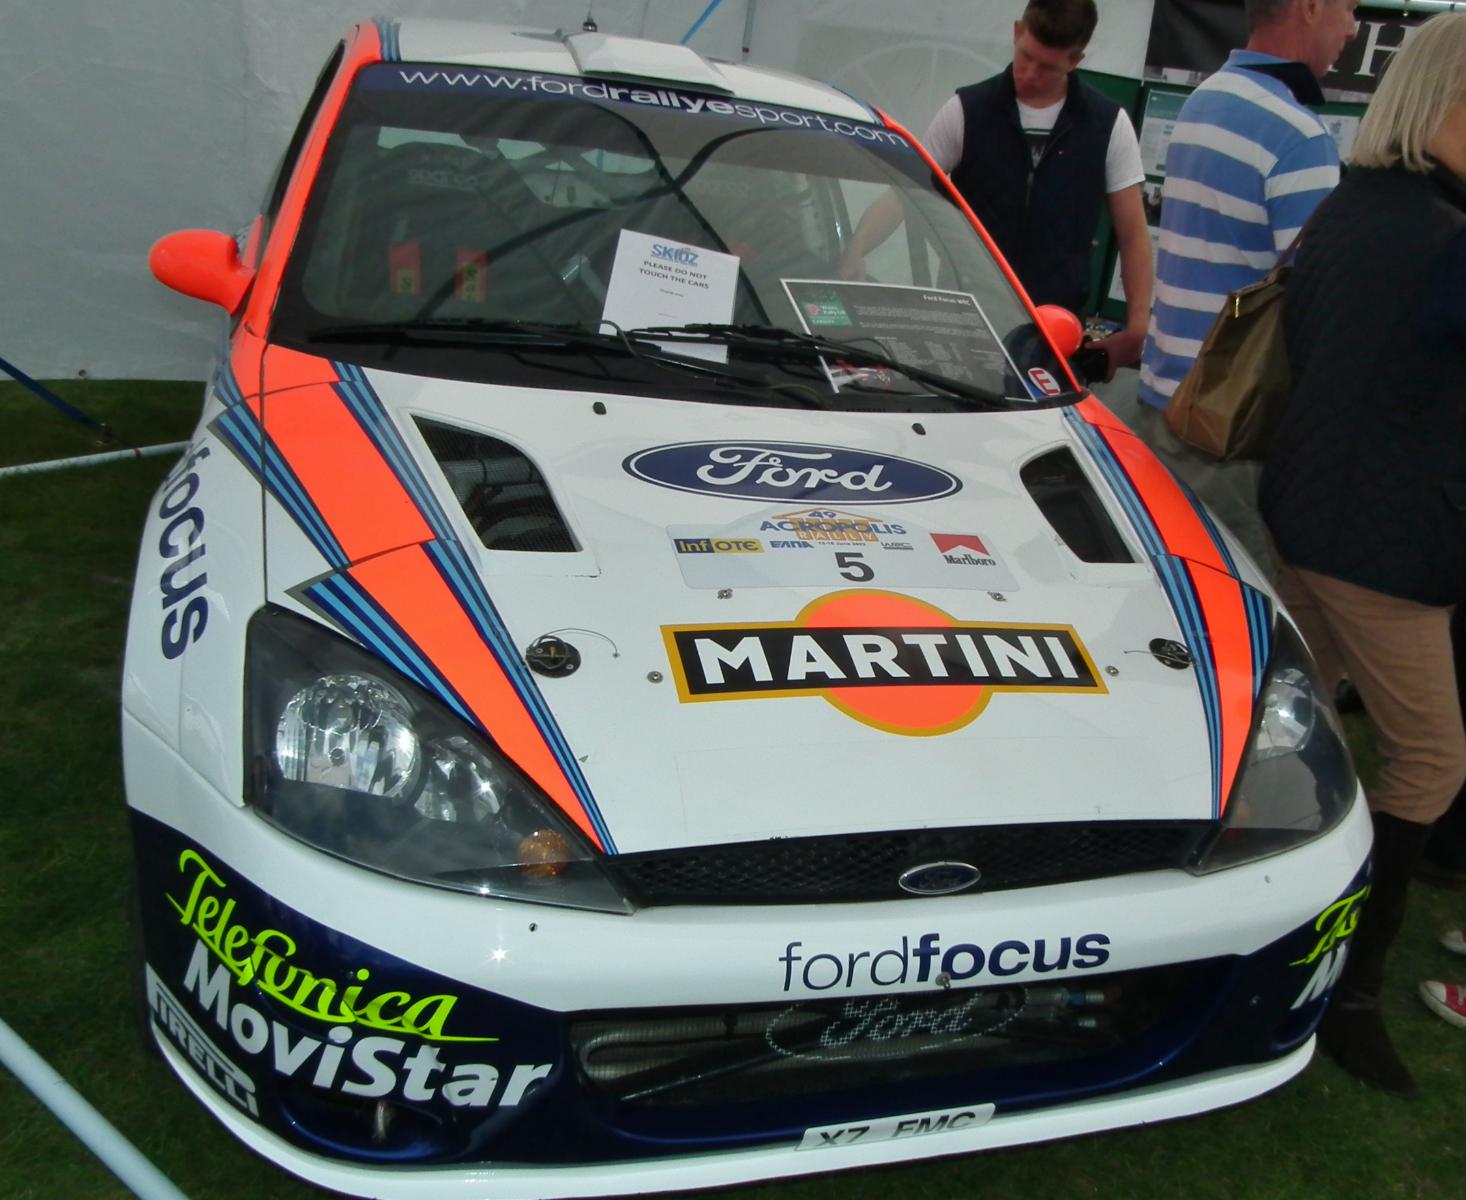 a ford fiesta rally car in front of a tent